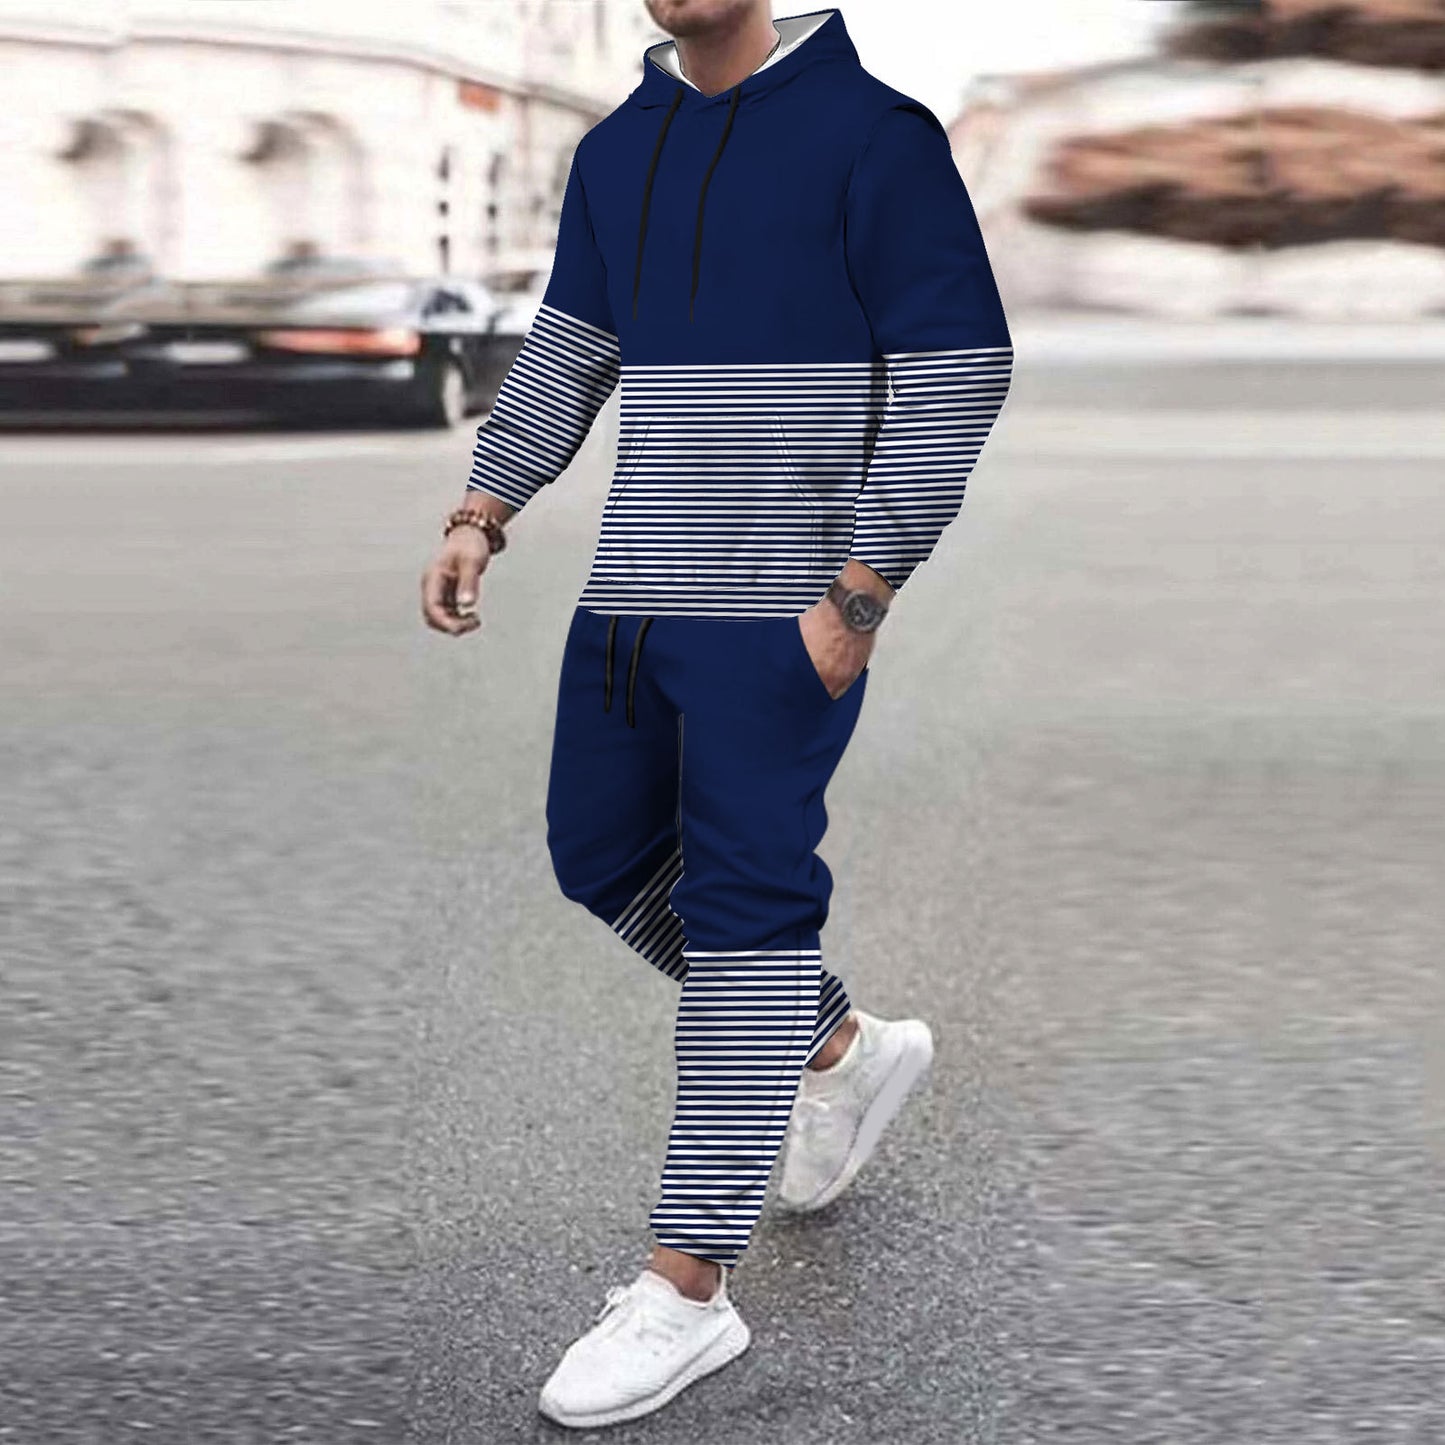 Men's Casual Loose-fitting Hoodie Sweater apparels & accessories